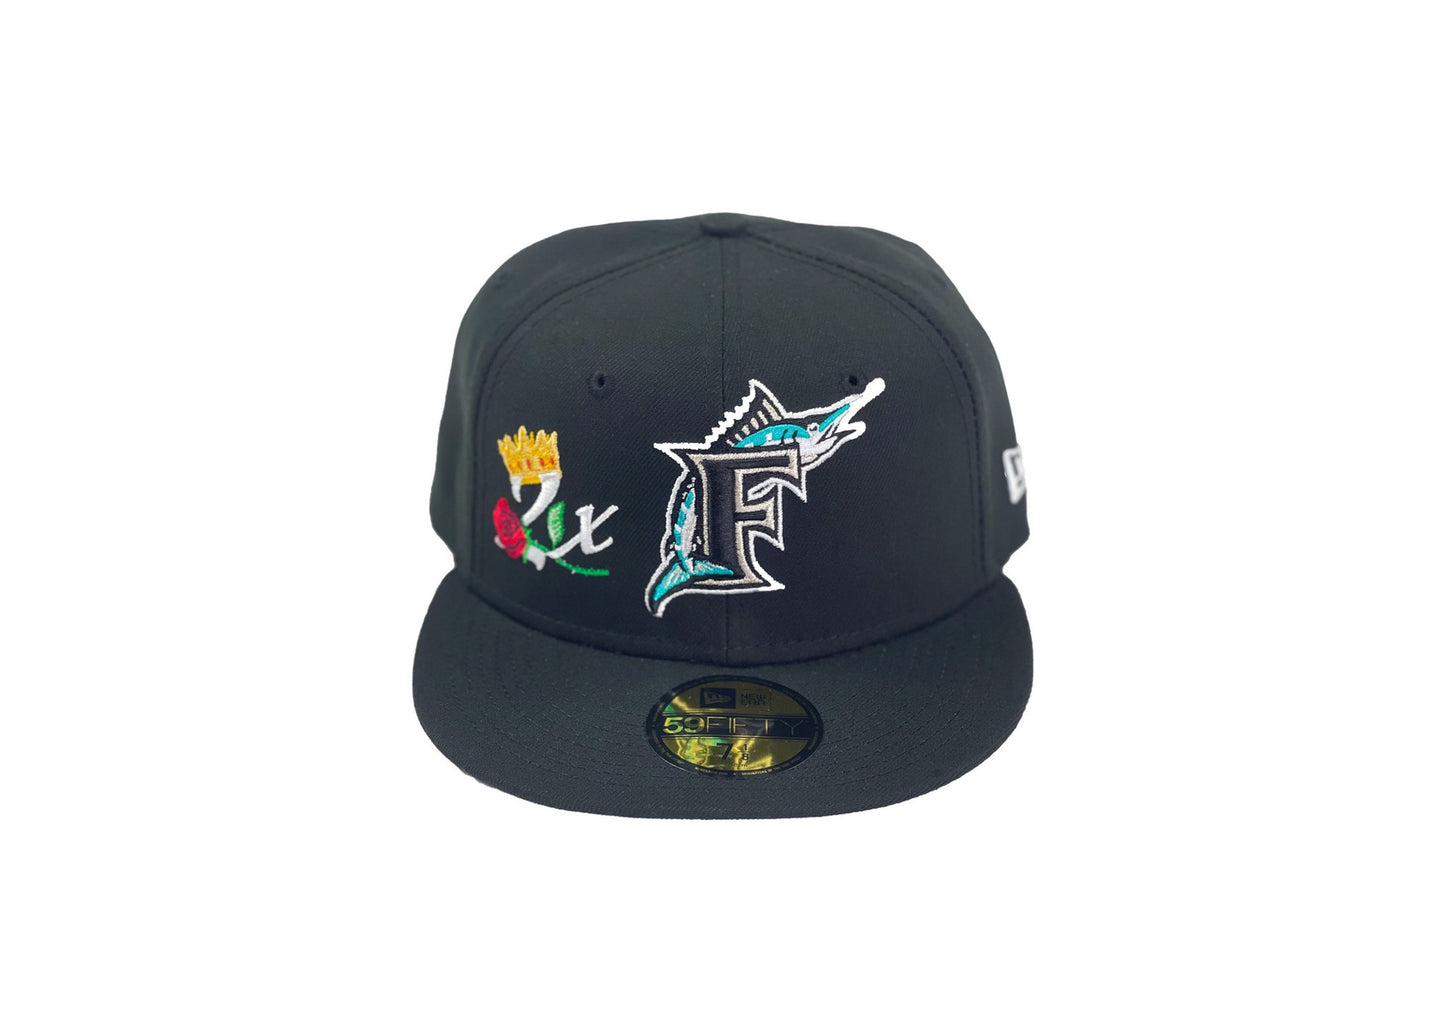 New Era Florida Marlins Crown Champs Fitted